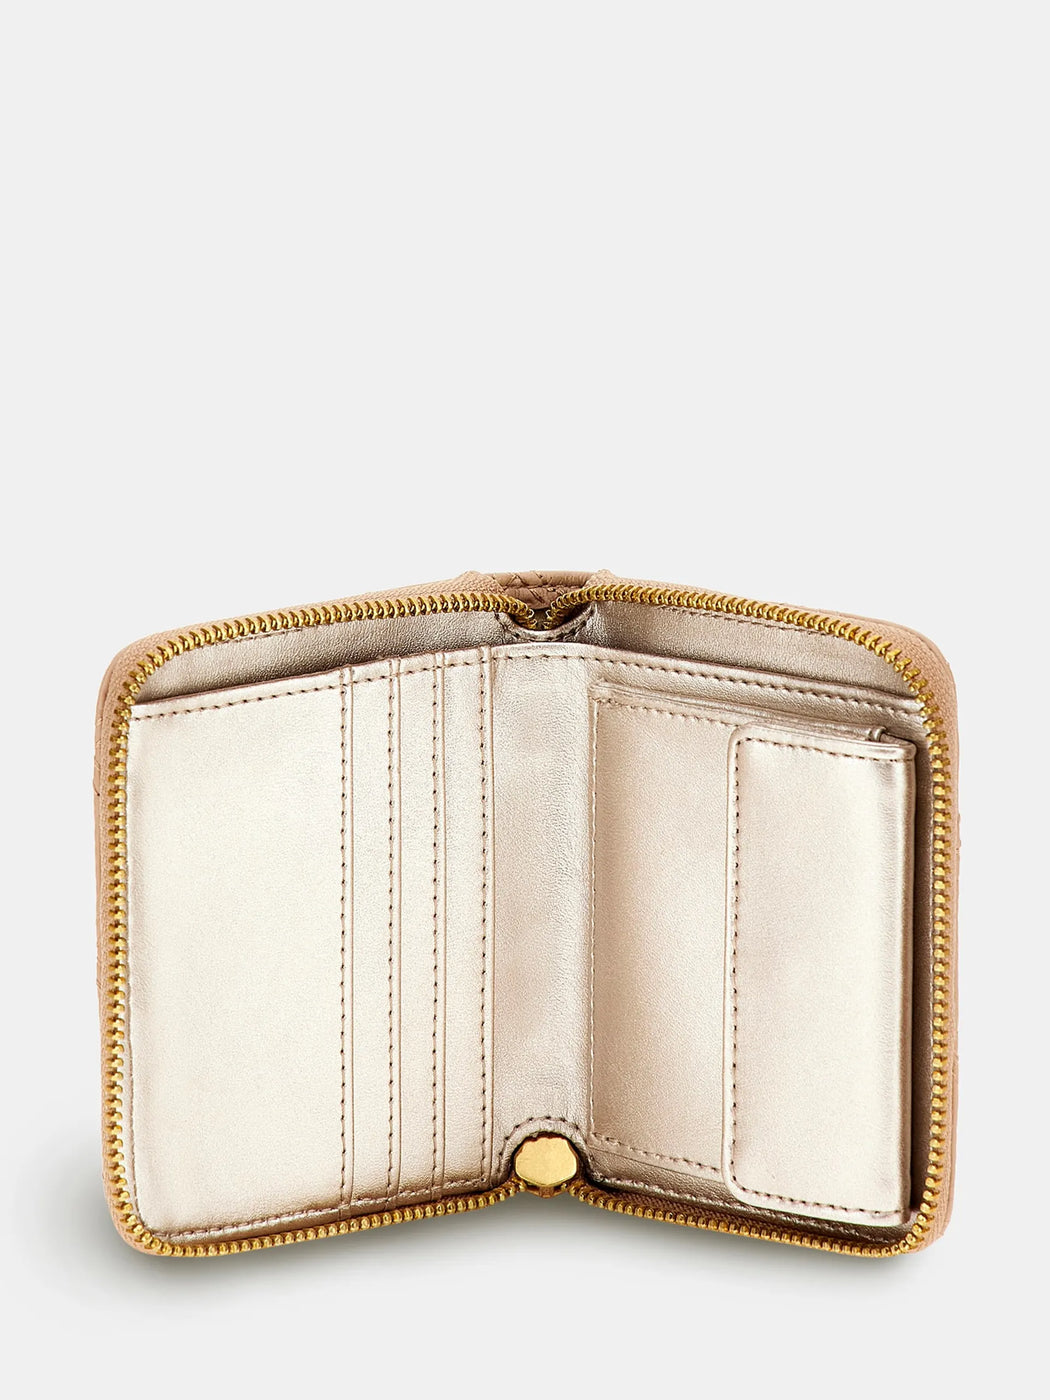 Beige Guess giully mini wallet